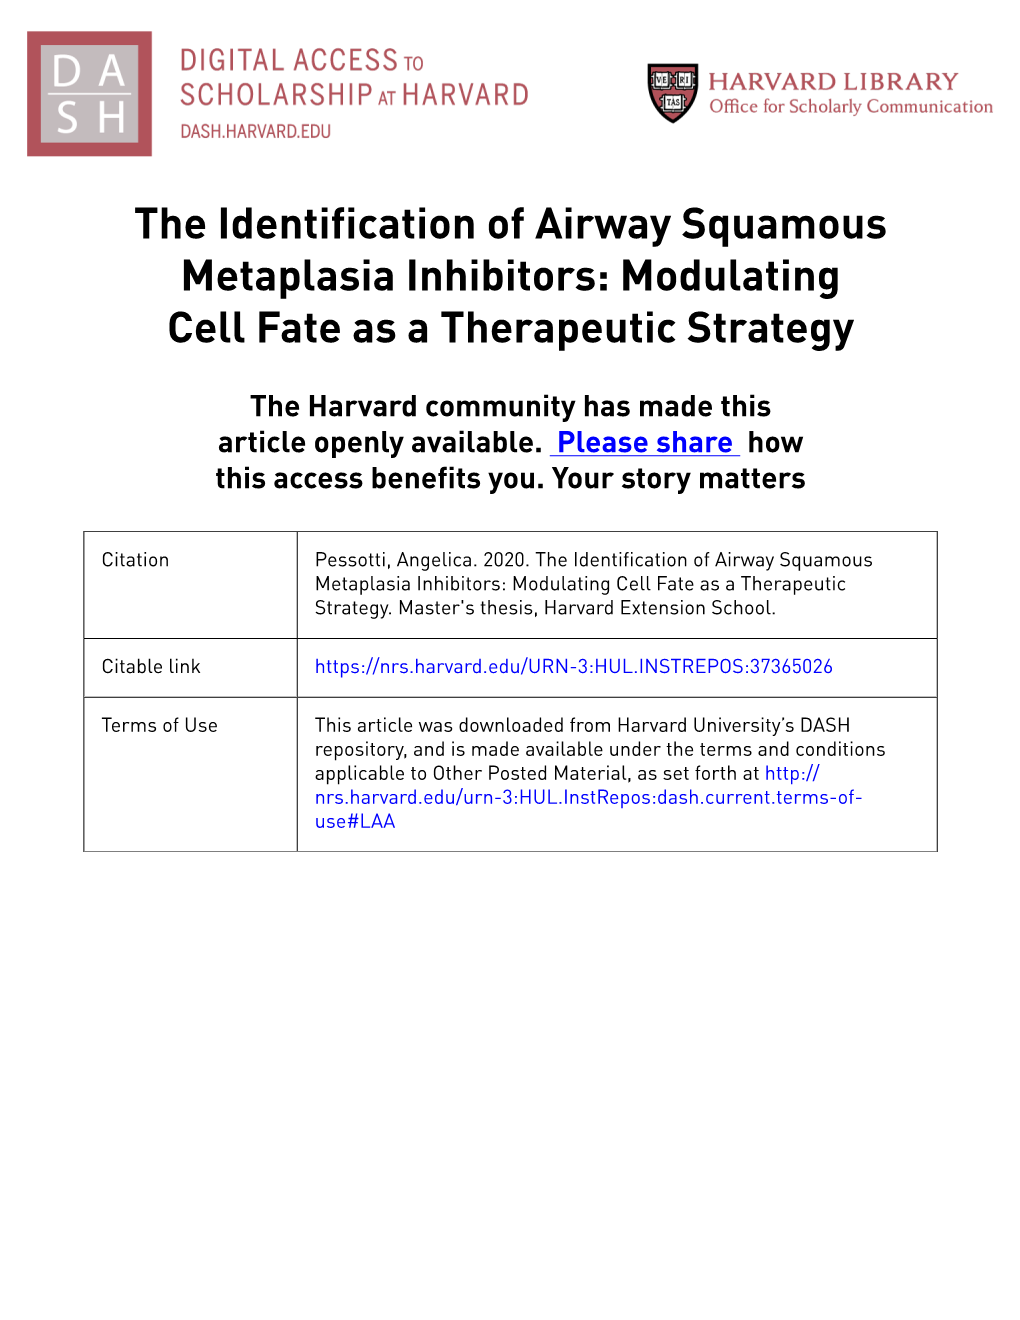 The Identification of Airway Squamous Metaplasia Inhibitors: Modulating Cell Fate As a Therapeutic Strategy